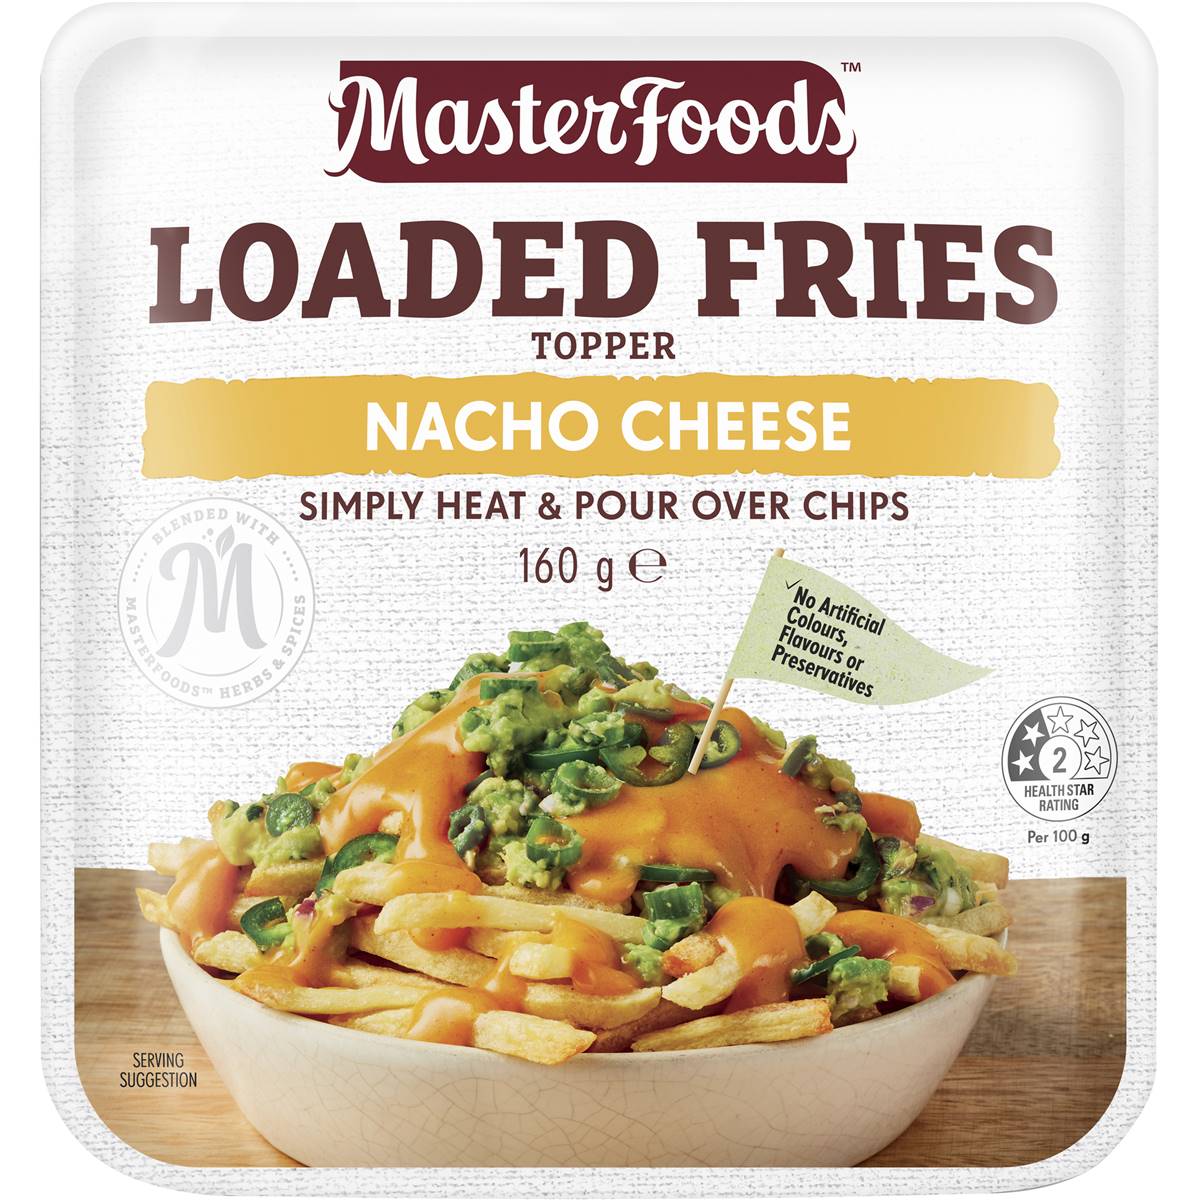 Calories in Masterfoods Loaded Fries Topper Nacho Cheese